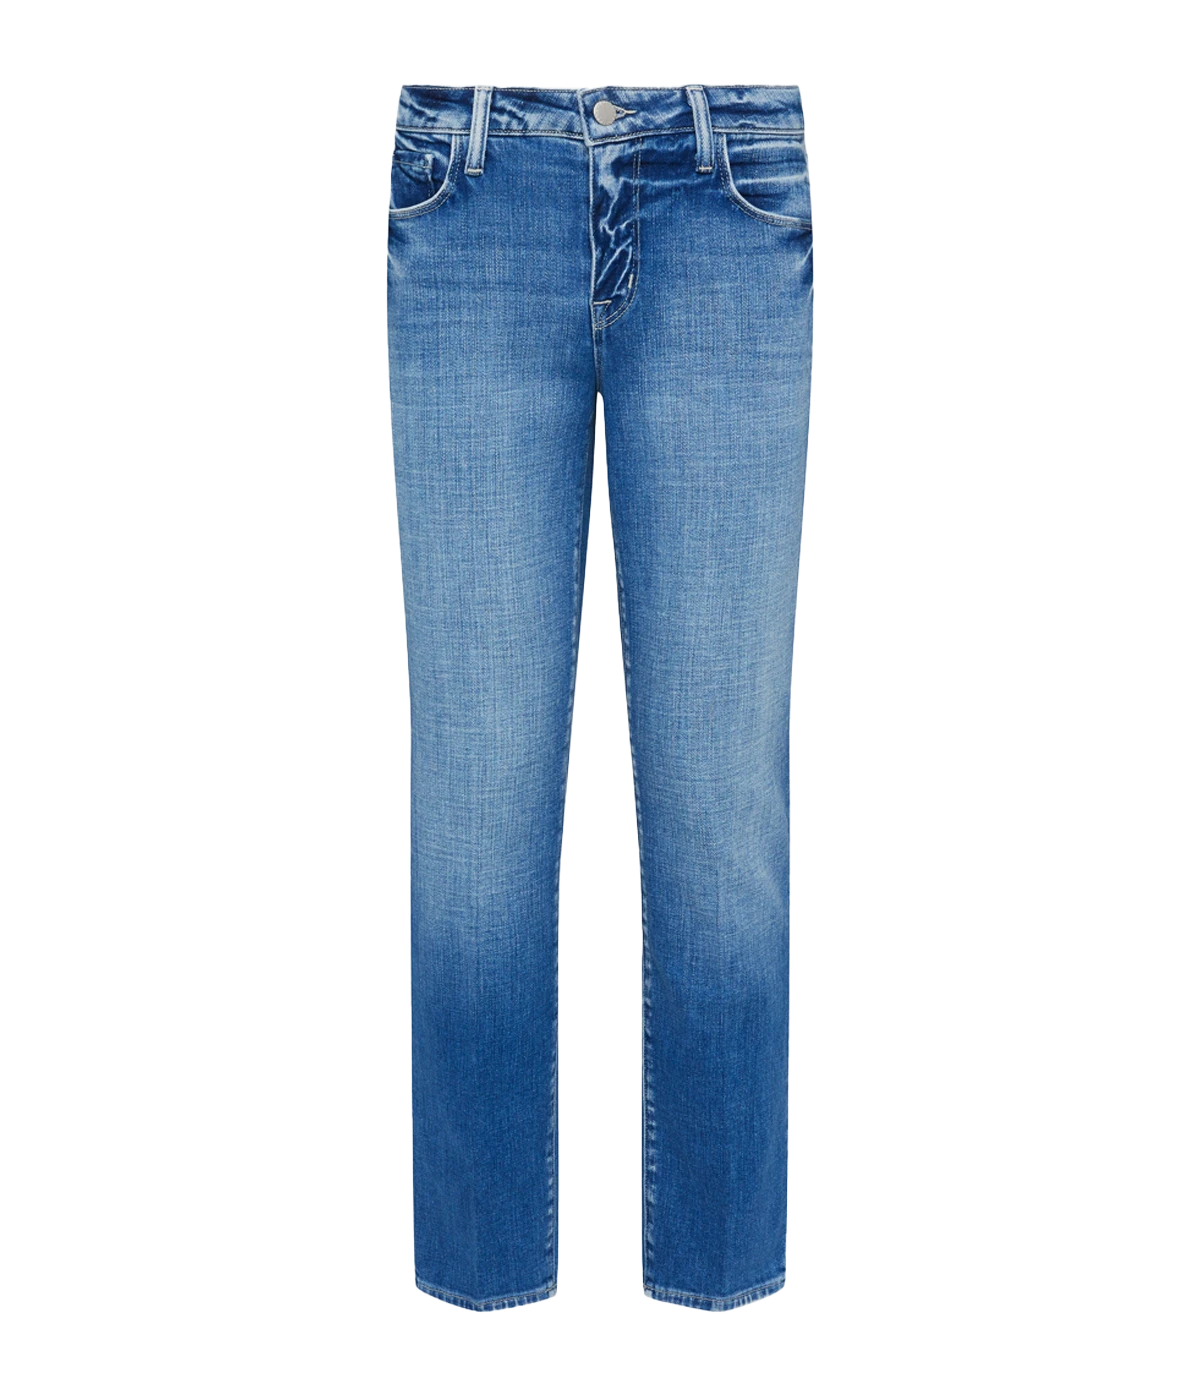  Image of a mid-rise slouch straight-leg jean in light-blue denim, with five-pocket construction and zip-fly closure, vintage worn in wash. Made in USA, everyday jean, comfortable, everyday jean. 